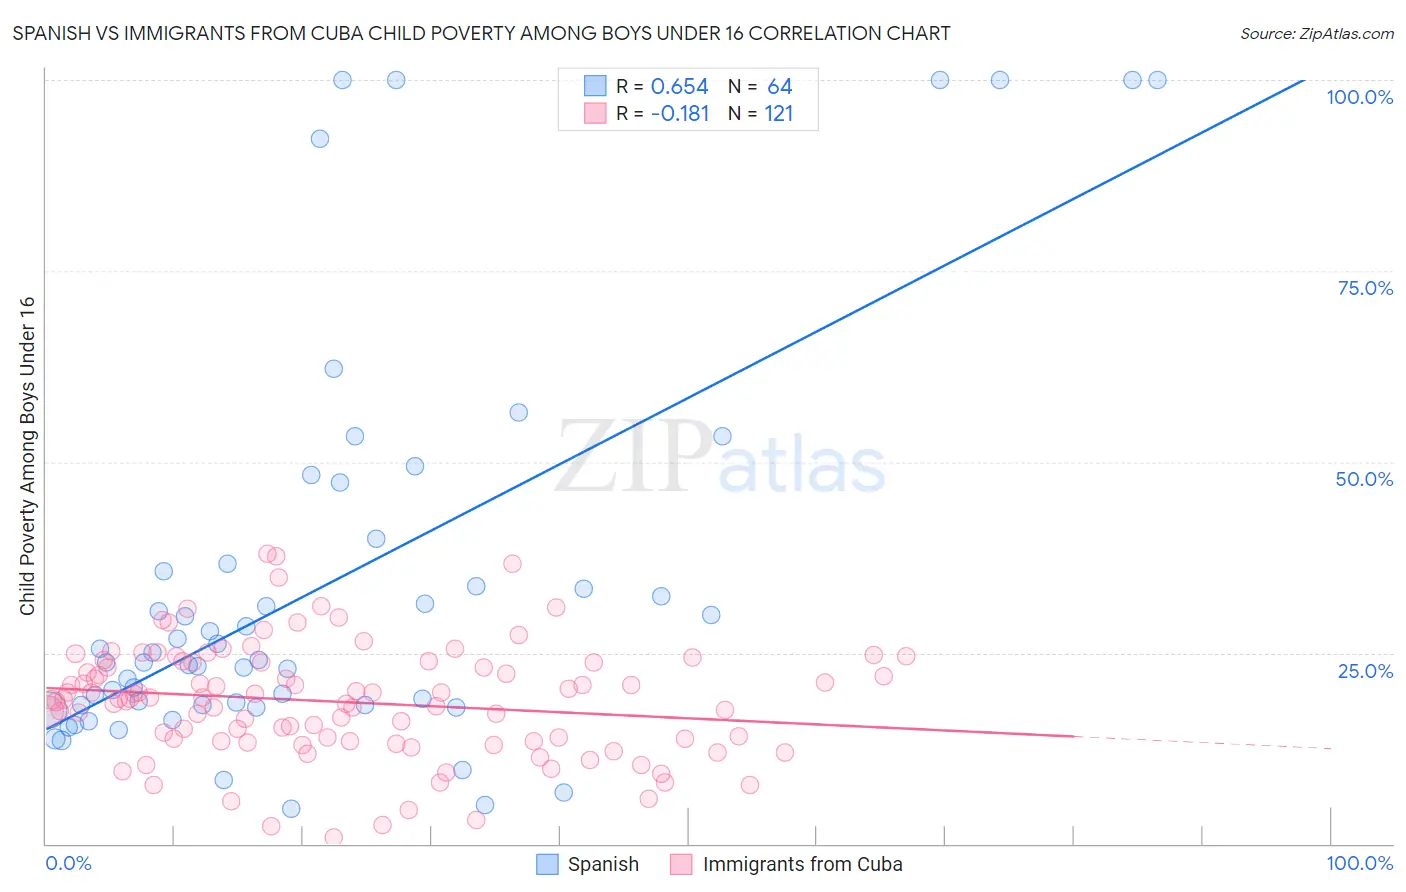 Spanish vs Immigrants from Cuba Child Poverty Among Boys Under 16